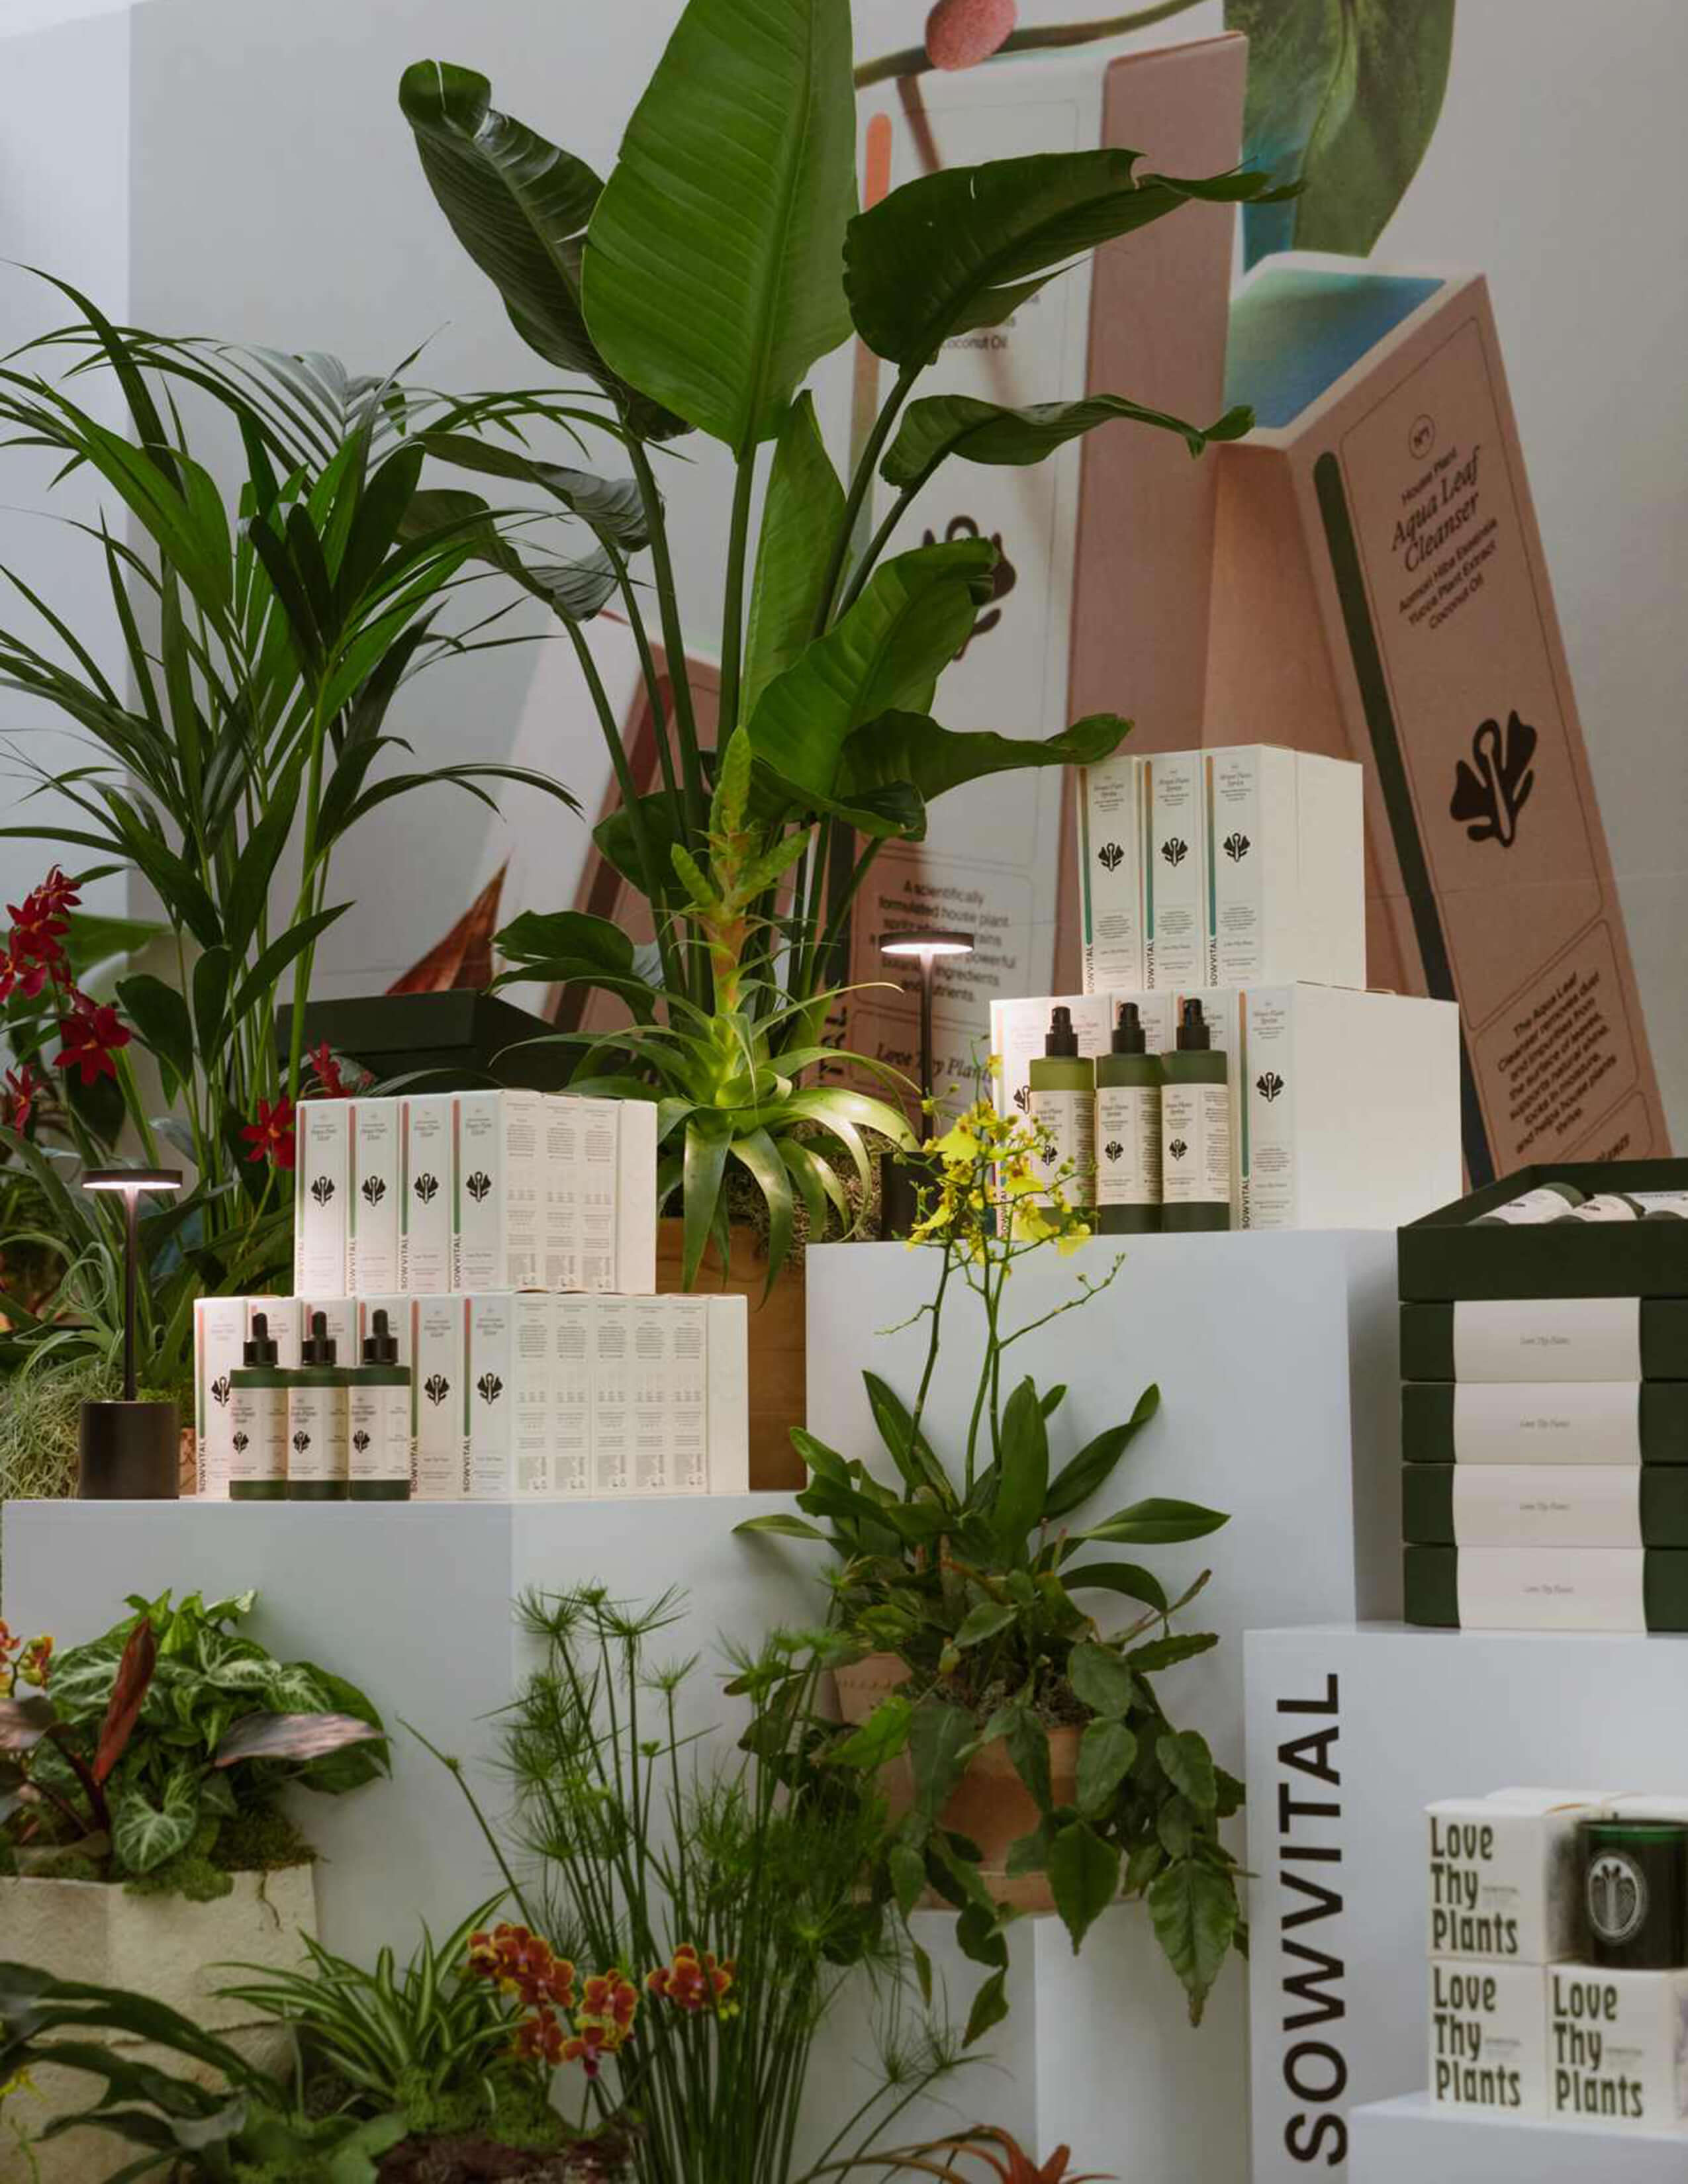 The Sowvital house plant products display an extensive collection of different plants/flowers.